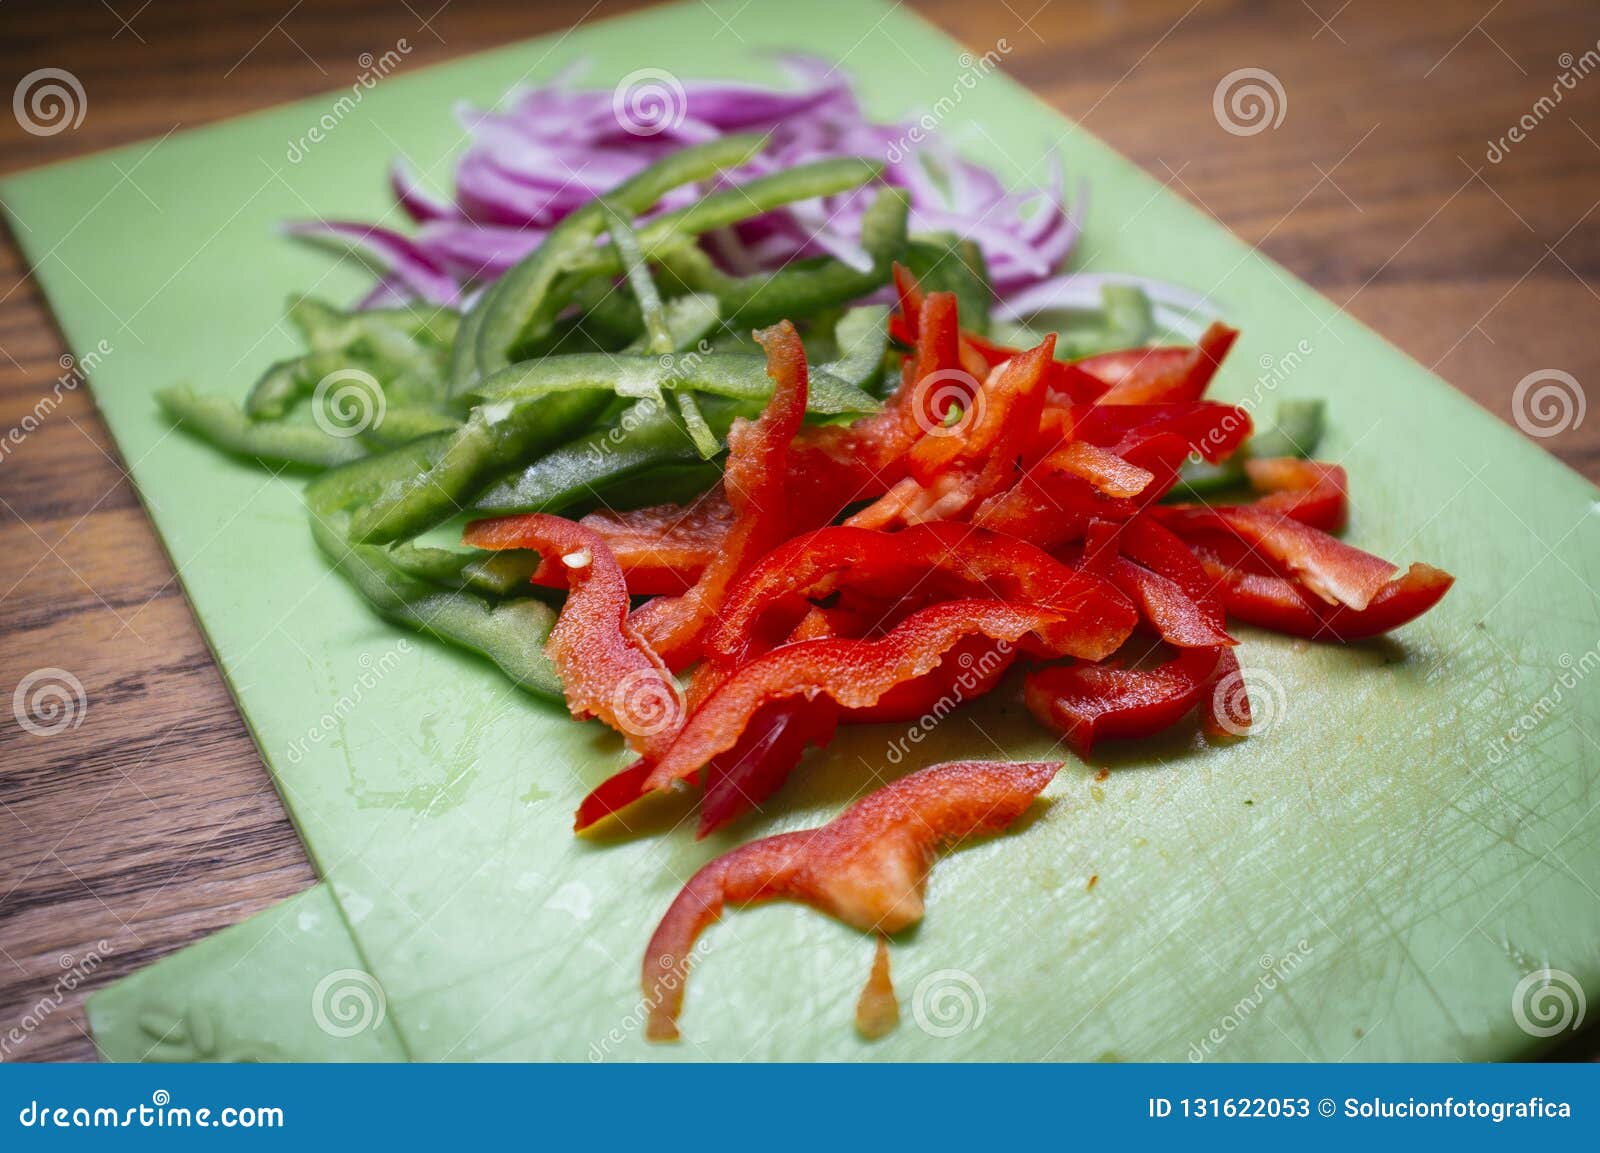 chopped vegetables on kitchen table